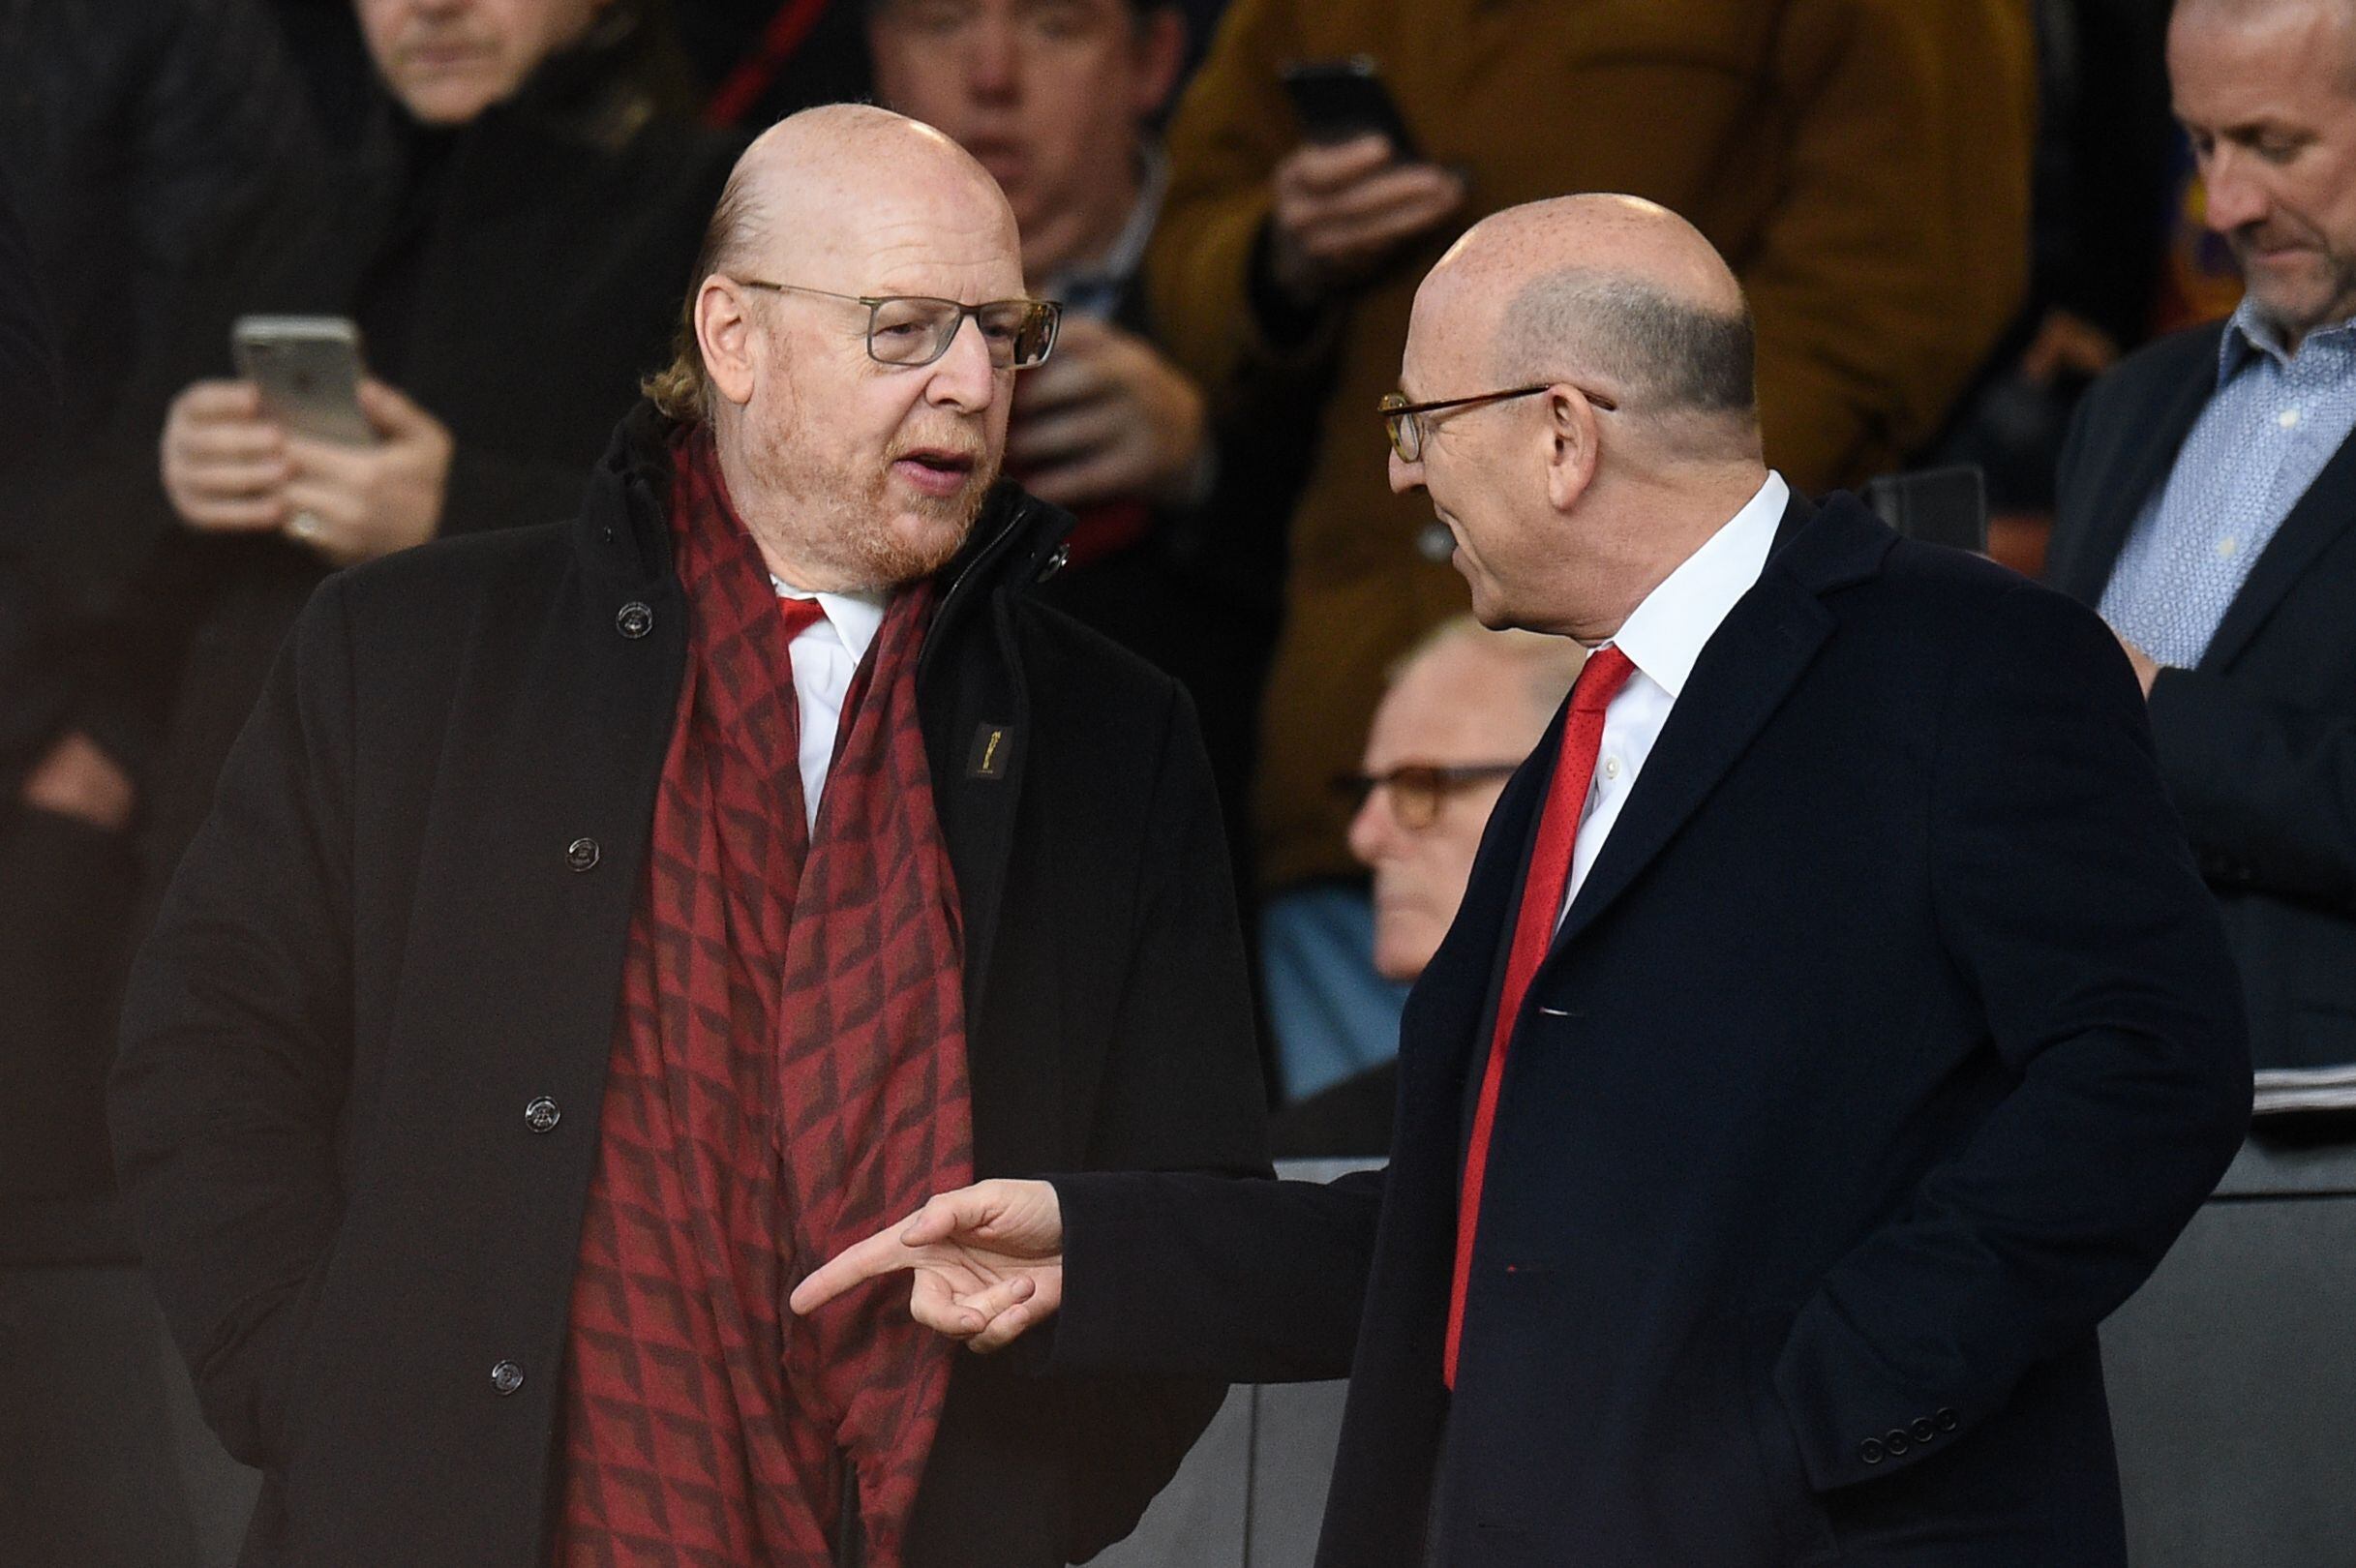 Will the Glazer family sell Manchester United?